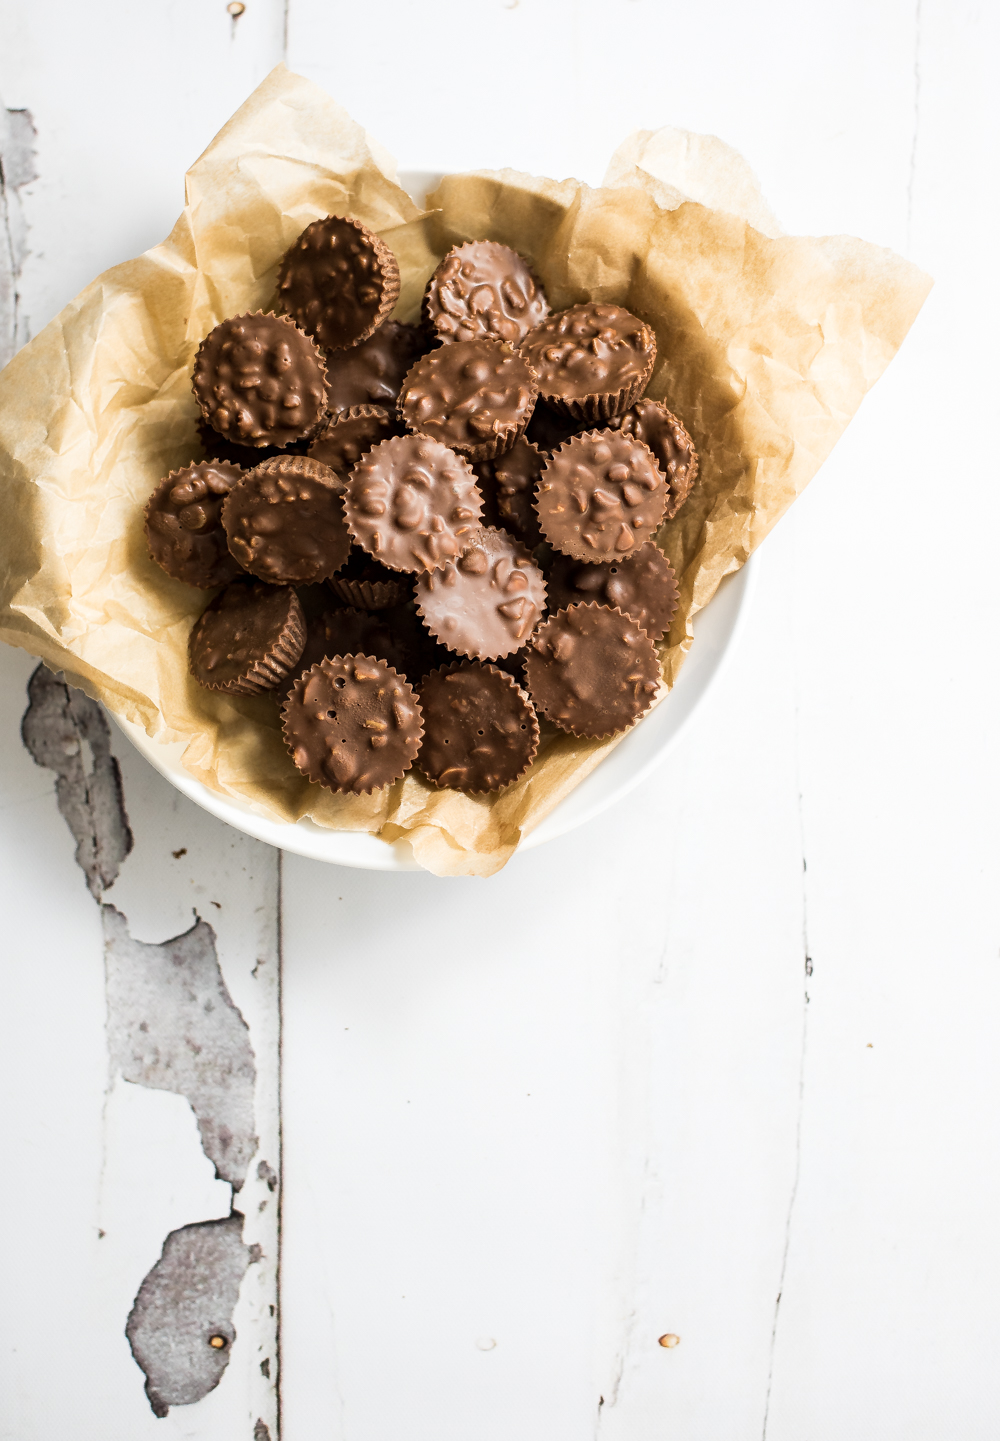 3-Ingredient Chocolate Hazelnut Candy Recipe is the perfect candy for the holidays! It only requires 3 ingredients and is ready in under 30 minutes!